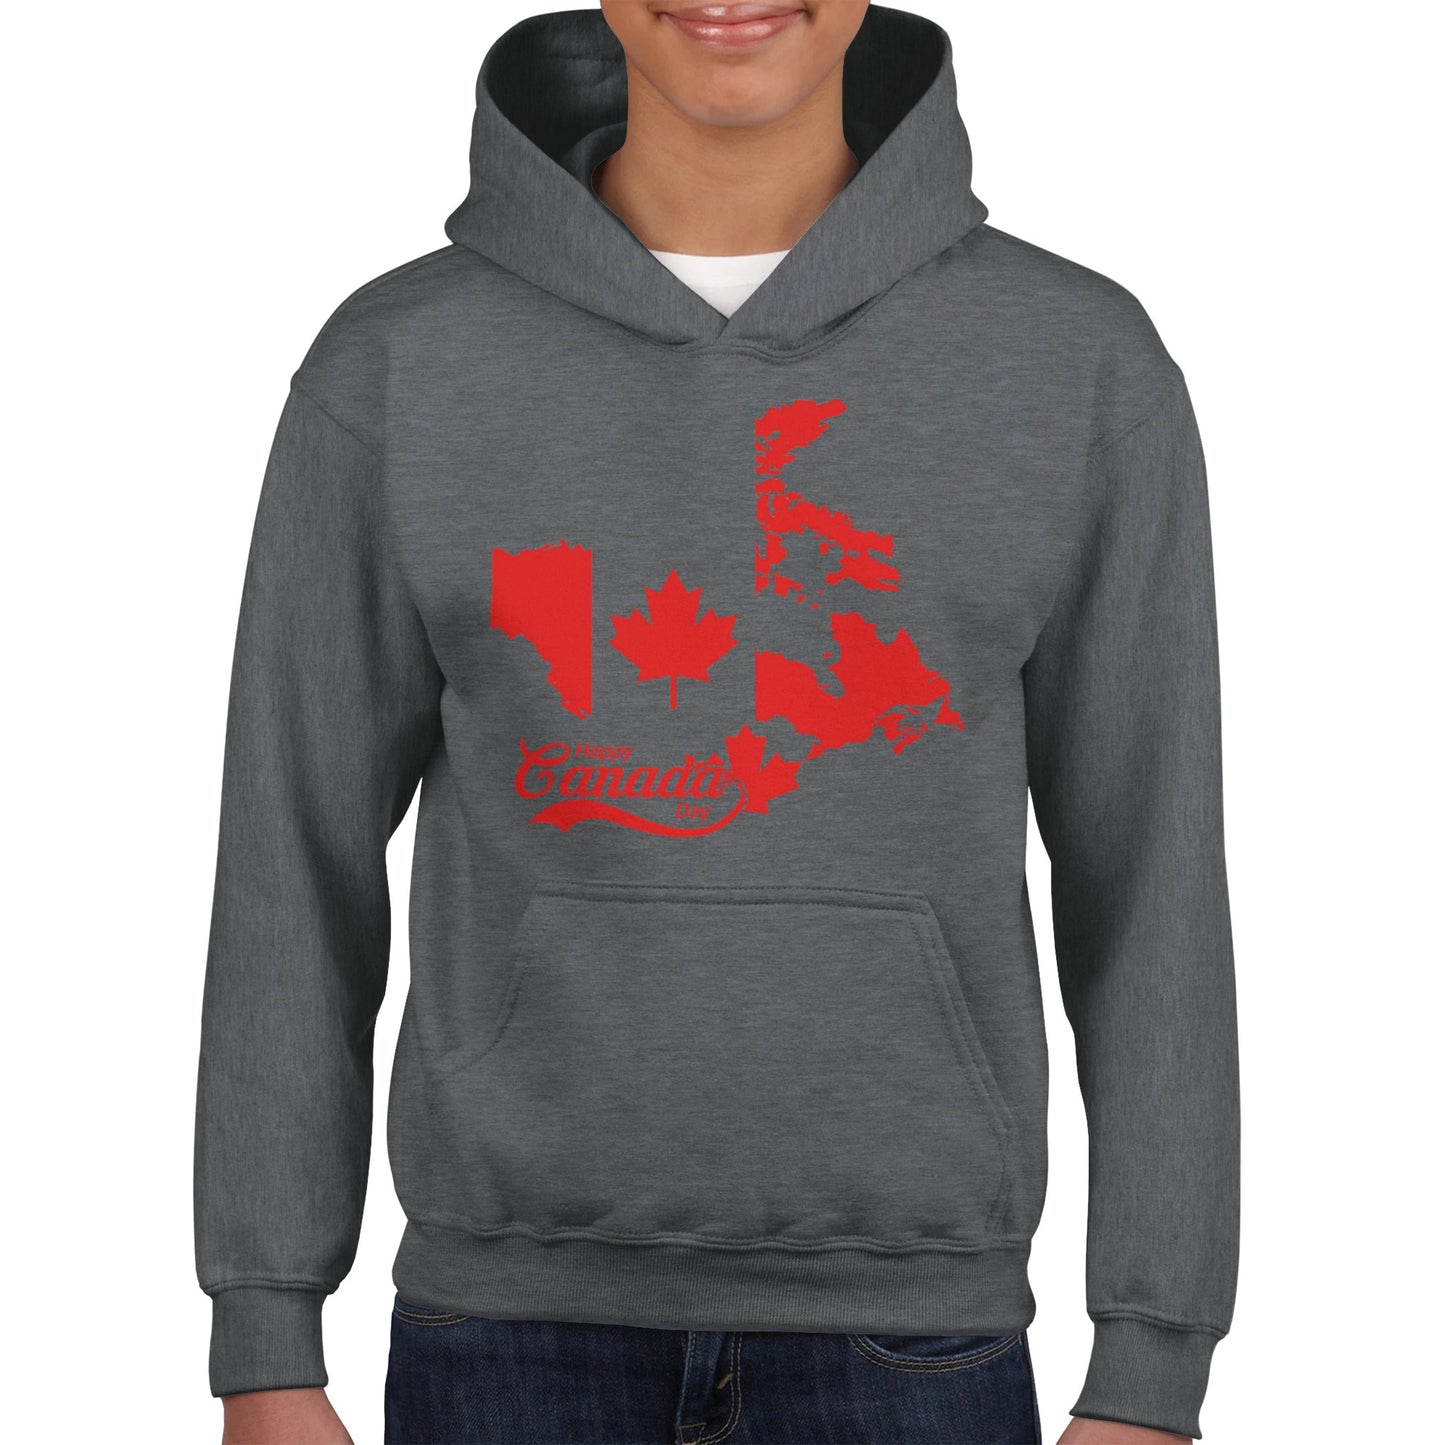 Happy Canada Day Classic Kids Pullover Hoodie